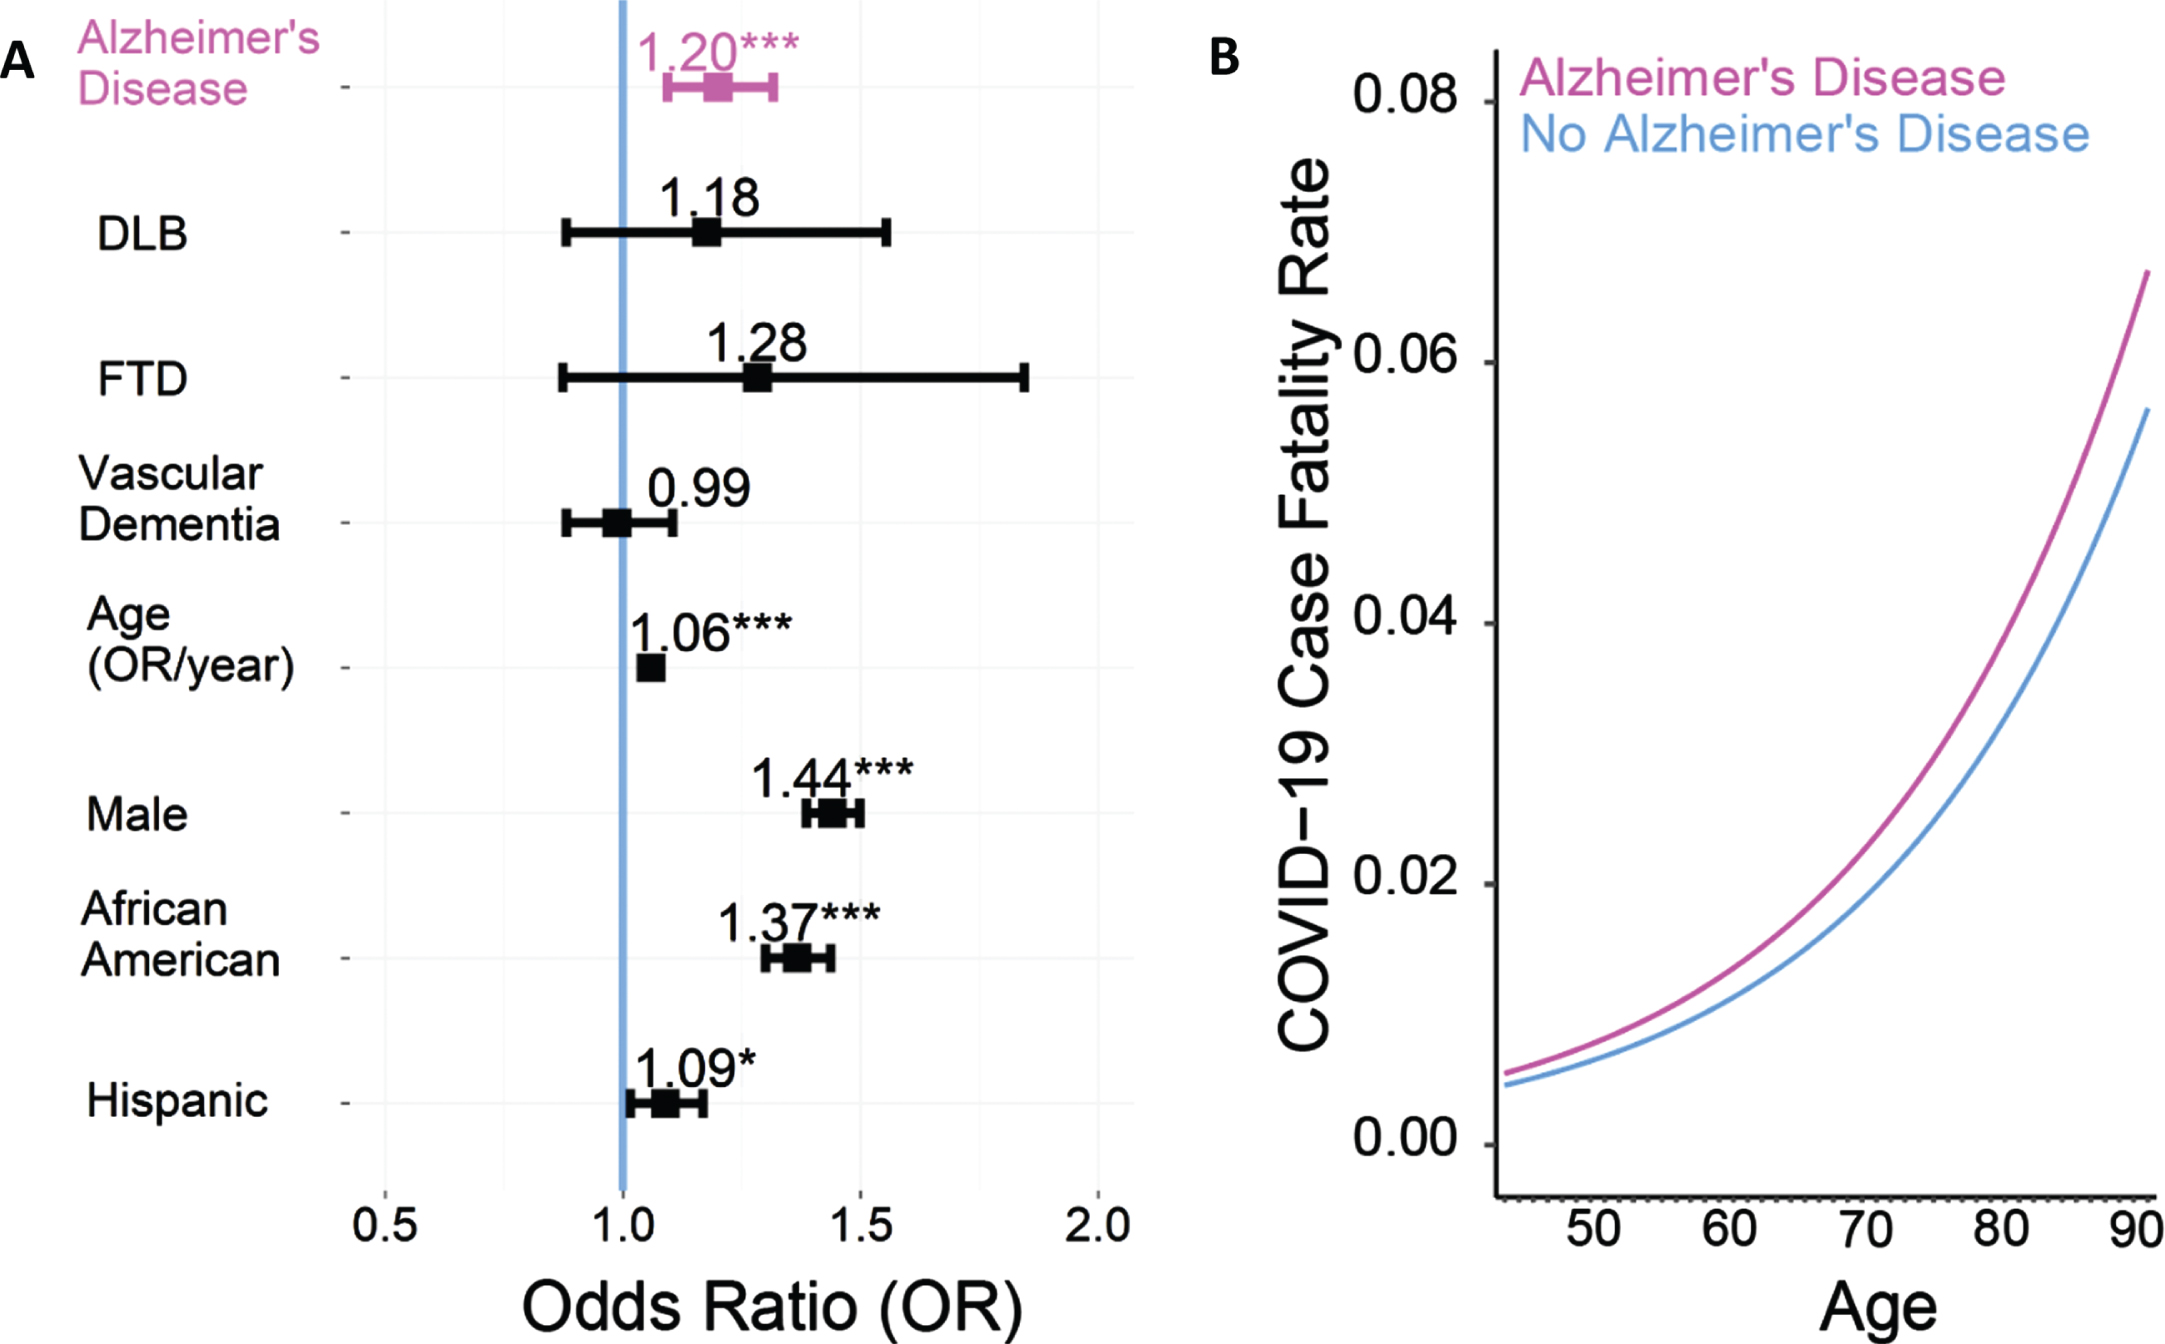 COVID-19 patients with Alzheimer’s disease (AD) have an increased case fatality rate (CFR). A) Odds ratio (OR) of COVID-19-induced case-fatality rate; an OR of greater than 1 means a greater risk of dying of COVID-19. COVID-19 patients with AD (n = 4174) have an increased CFR compared to those without AD (n = 383,667, odds ratio: 1.20, 95%confidence interval: 1.09–1.32, p < 0.001; this would mean that all other factors being equal, a patient with AD would have a ∼20%increased chance of COVID-19 mortality). Logistic regression was performed with age, sex, race, ethnicity and 30 comorbidities from the Elixhauser comorbidity index included as covariables. Data from 387,841 COVID-19 patients in the TriNetX research network. B) COVID-19 CFR was higher across age groups > 50 years. Lines represent the model fit of each year (with age as a fixed effect) for AD patients (pink) and those without AD (blue).